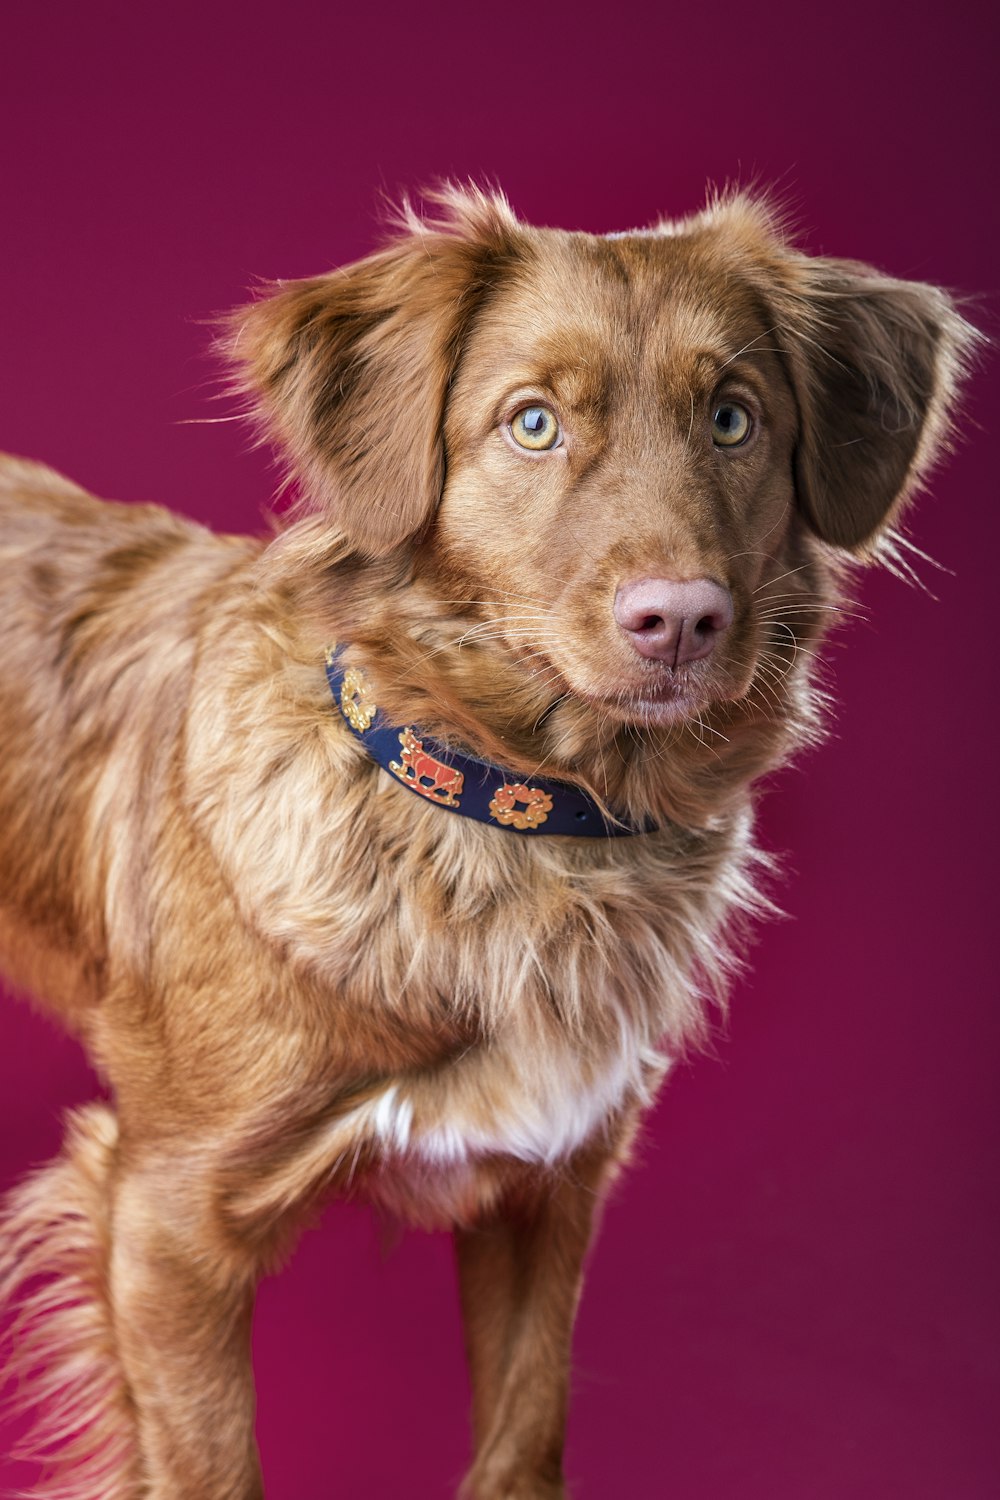 a close up of a dog on a pink background